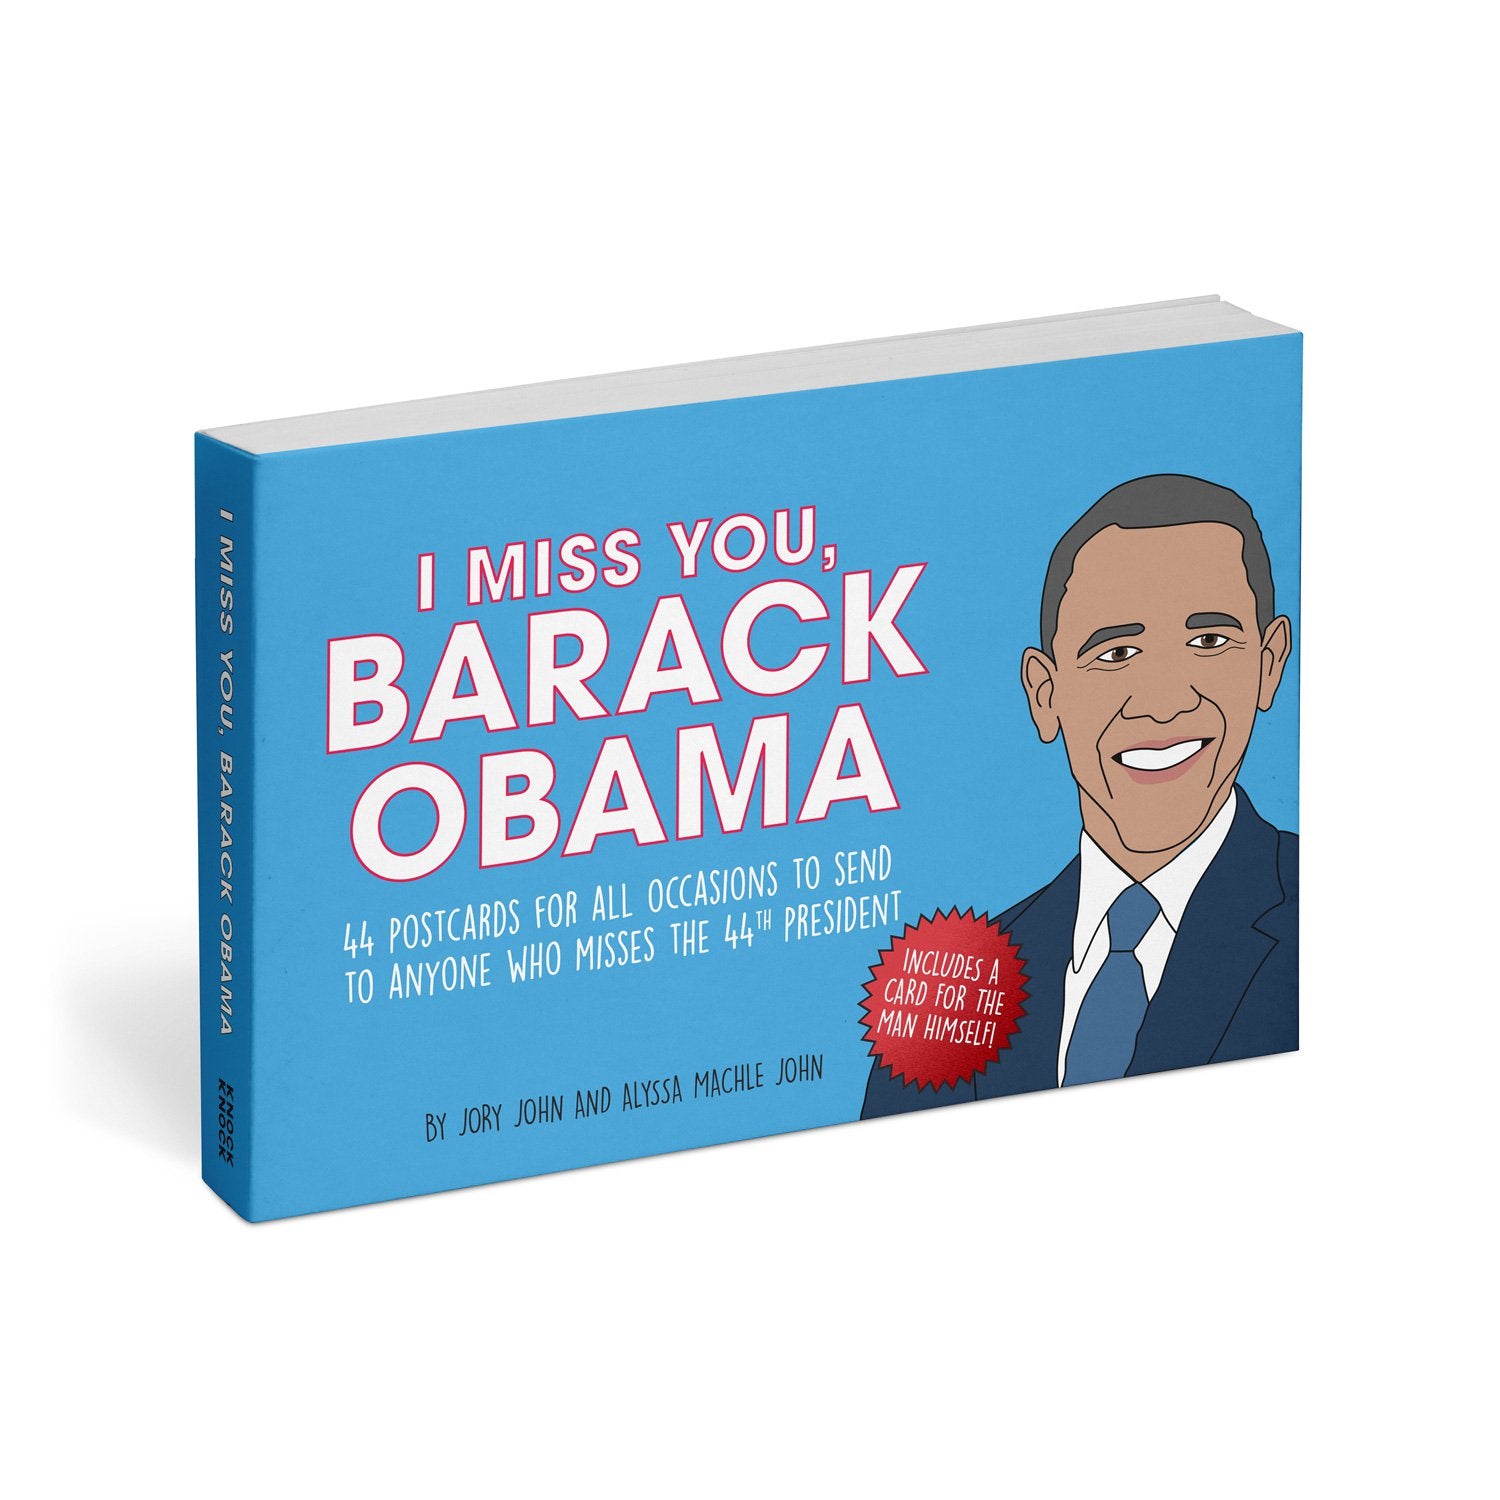 I Miss You, Barack Obama: 44 Postcards For All Occasions To Send To Anyone Who Misses The 44th President